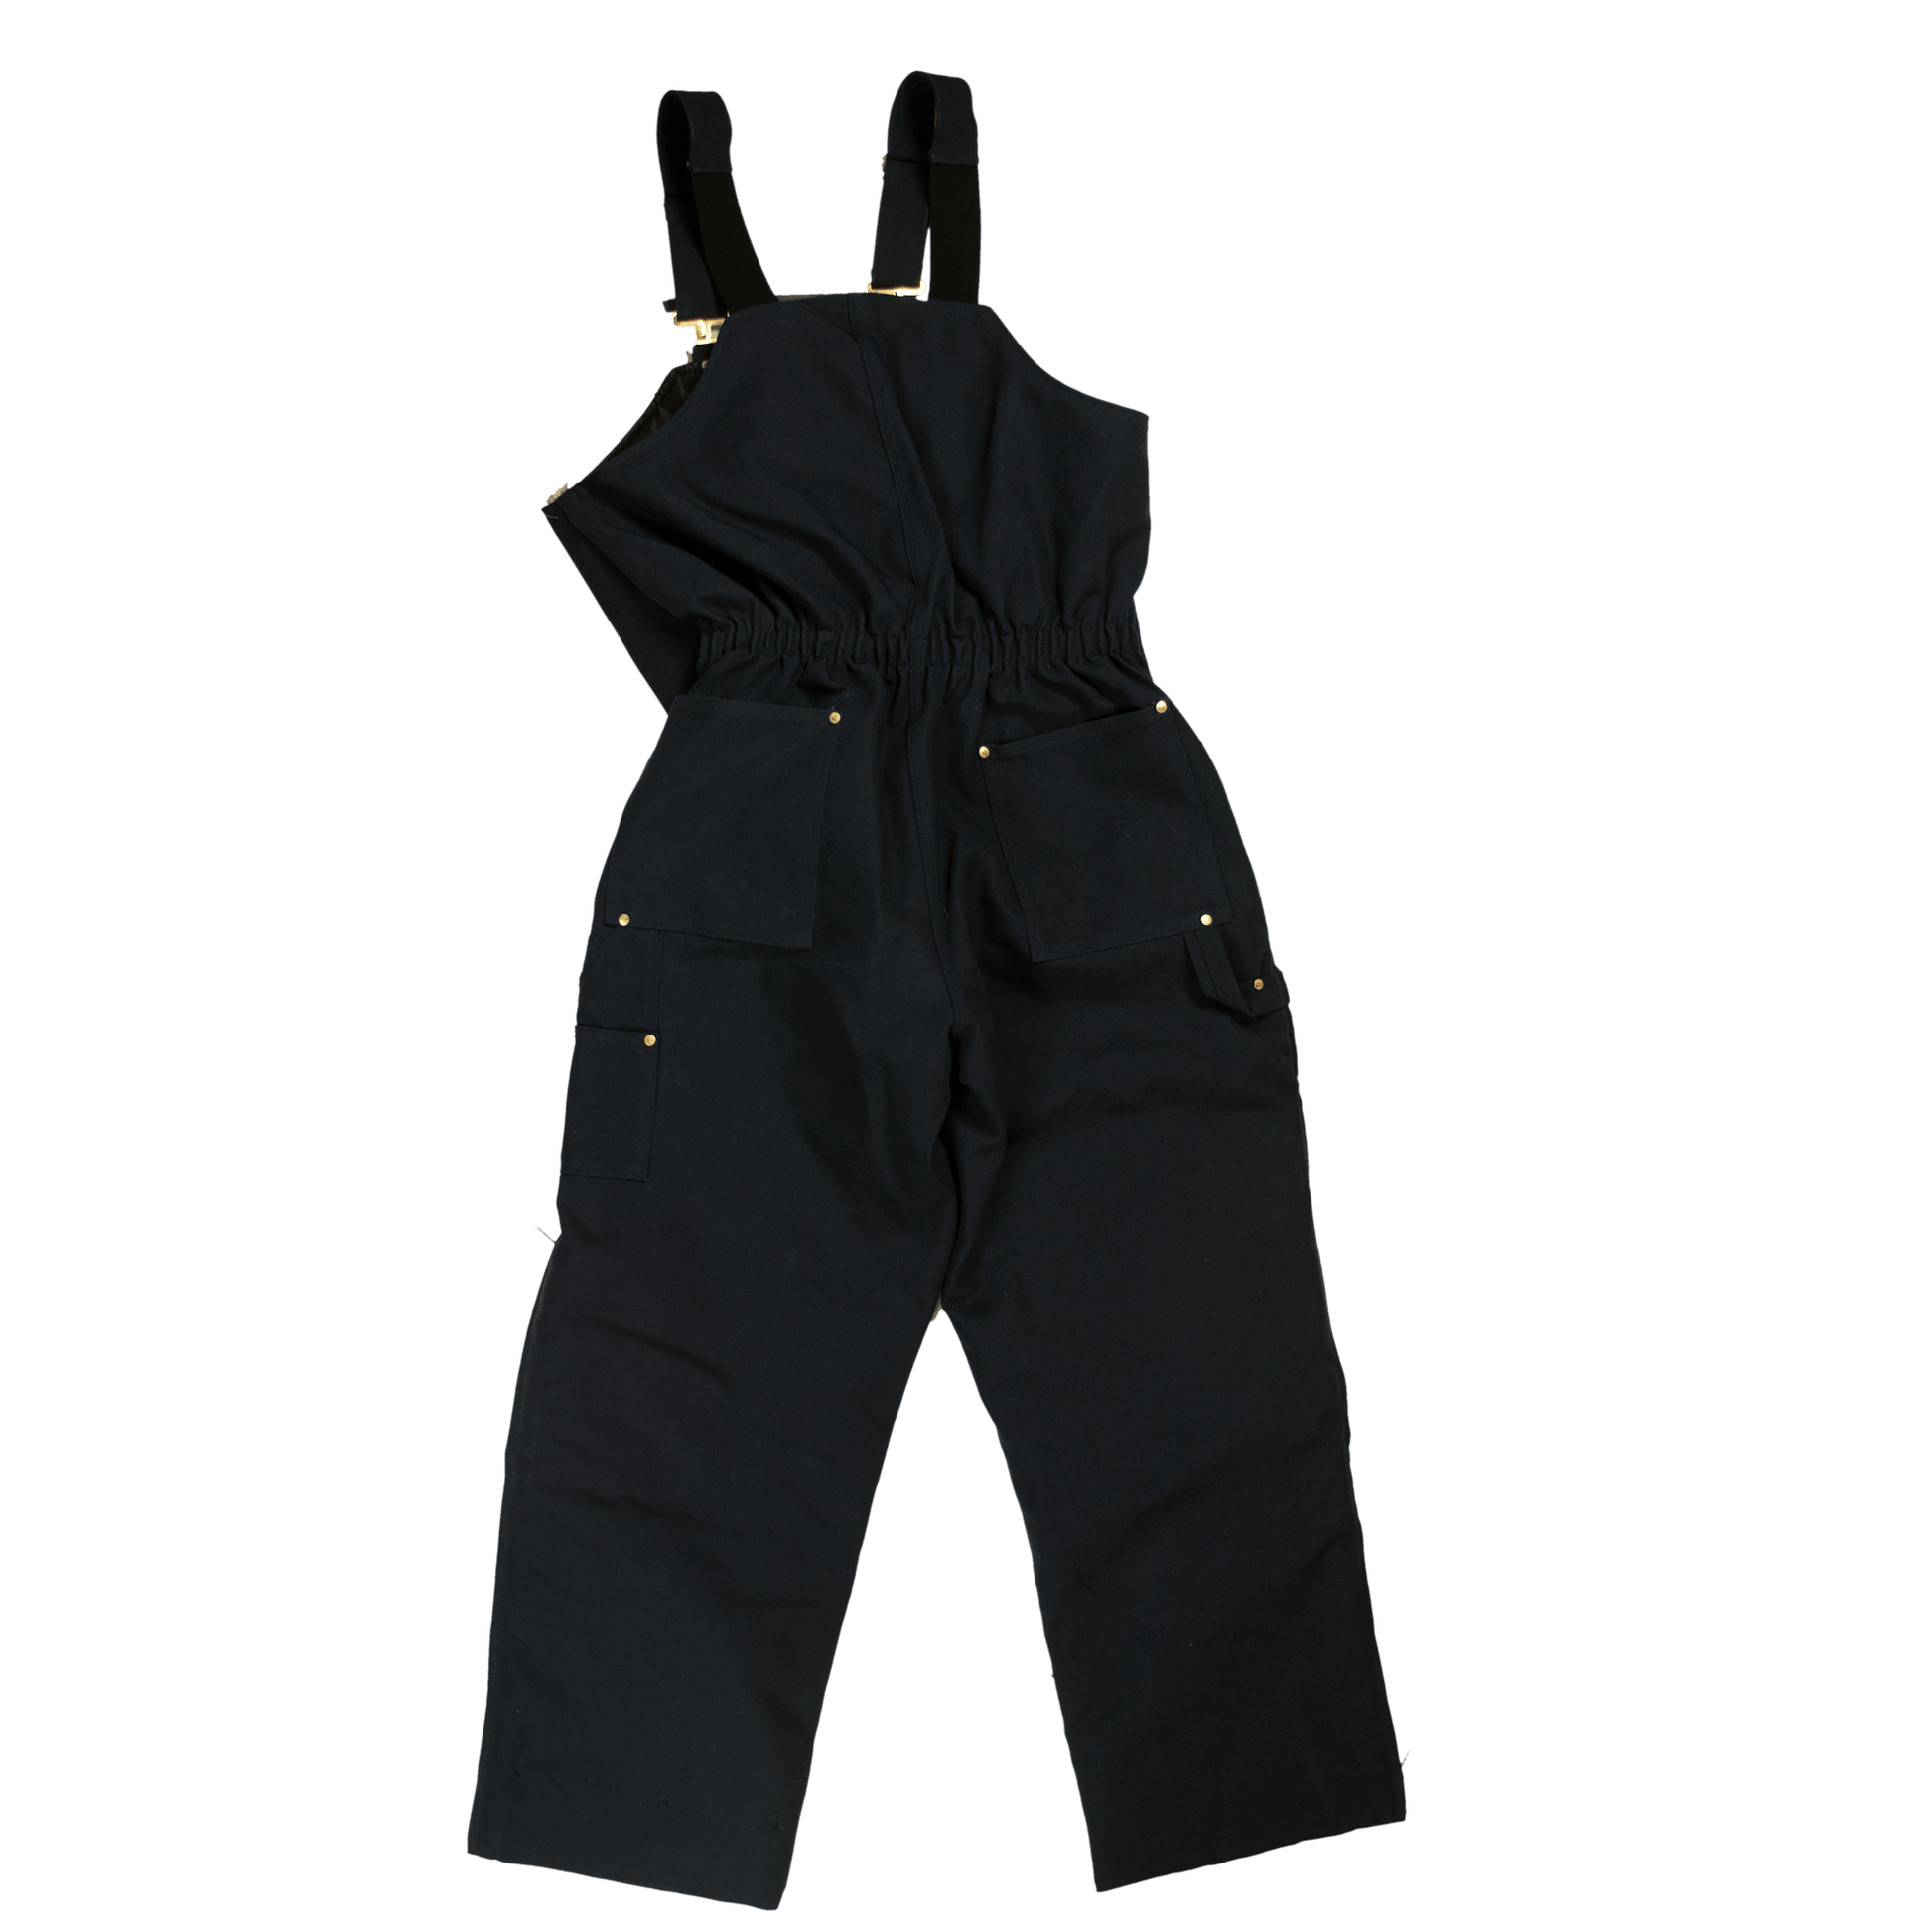 Tough Duck Insulated Bib Overalls - 7537 - Navy - back